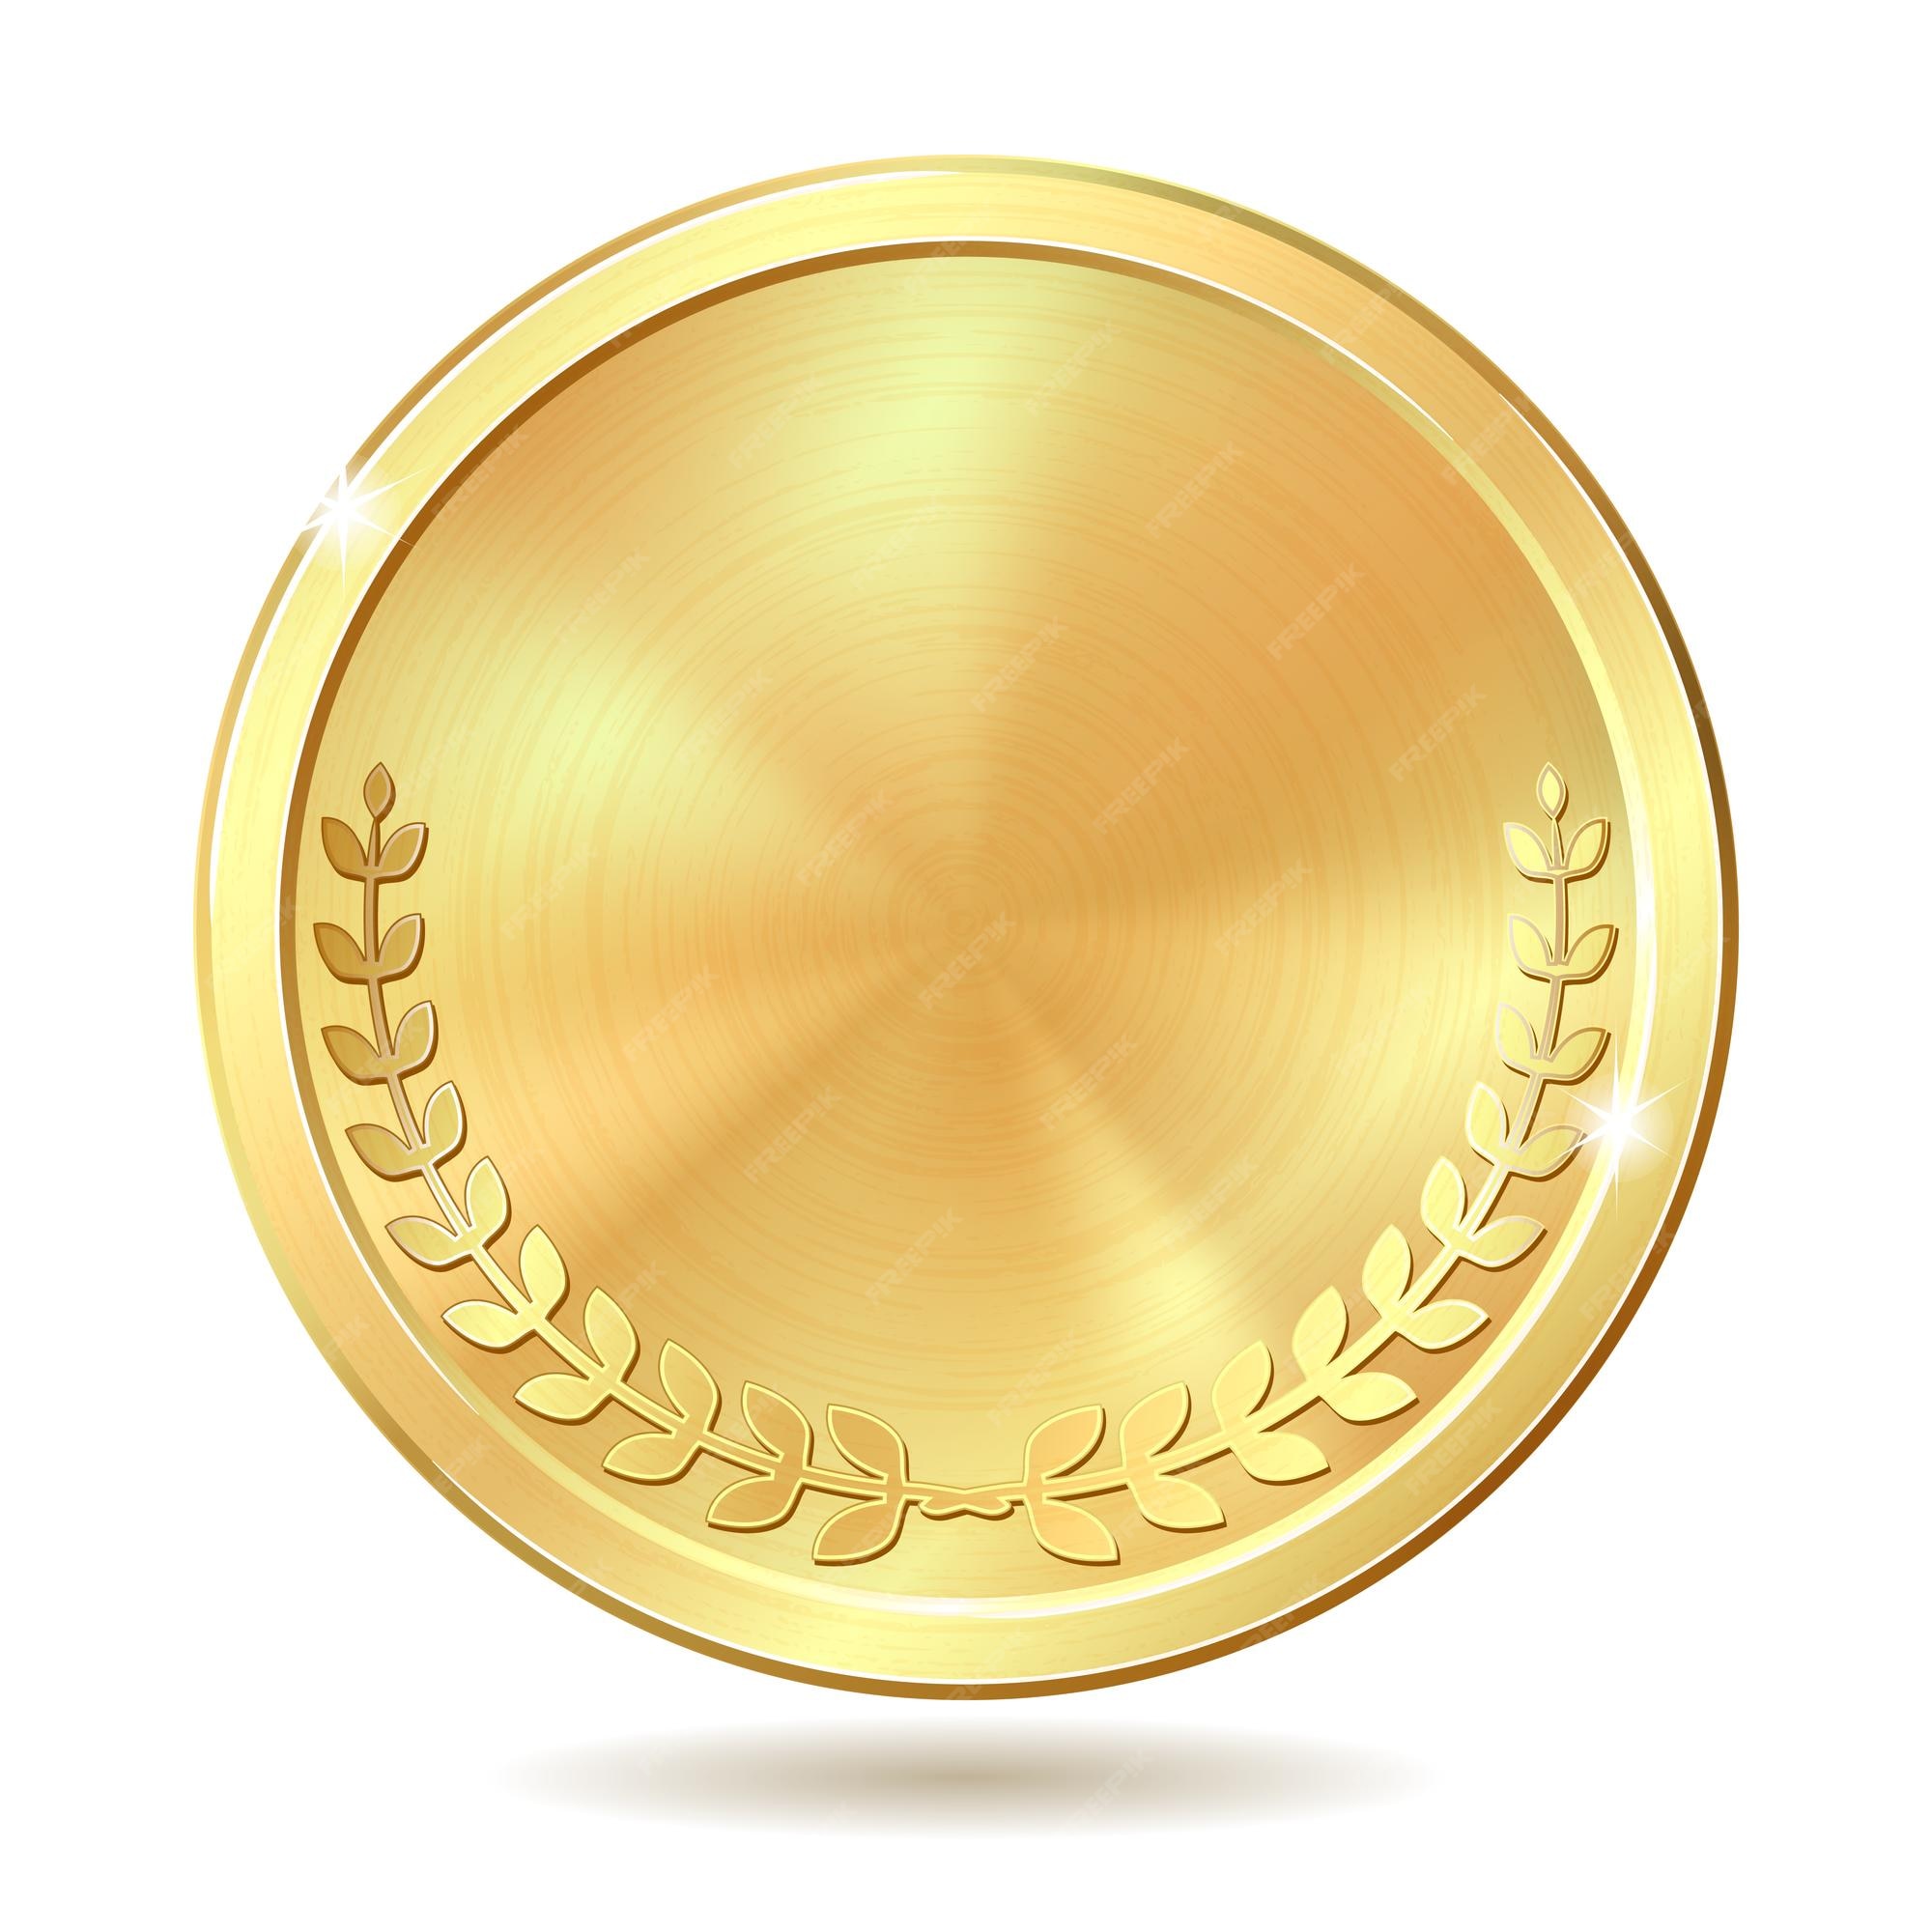 Premium Vector | Gold coin vector illustration isolated on white background